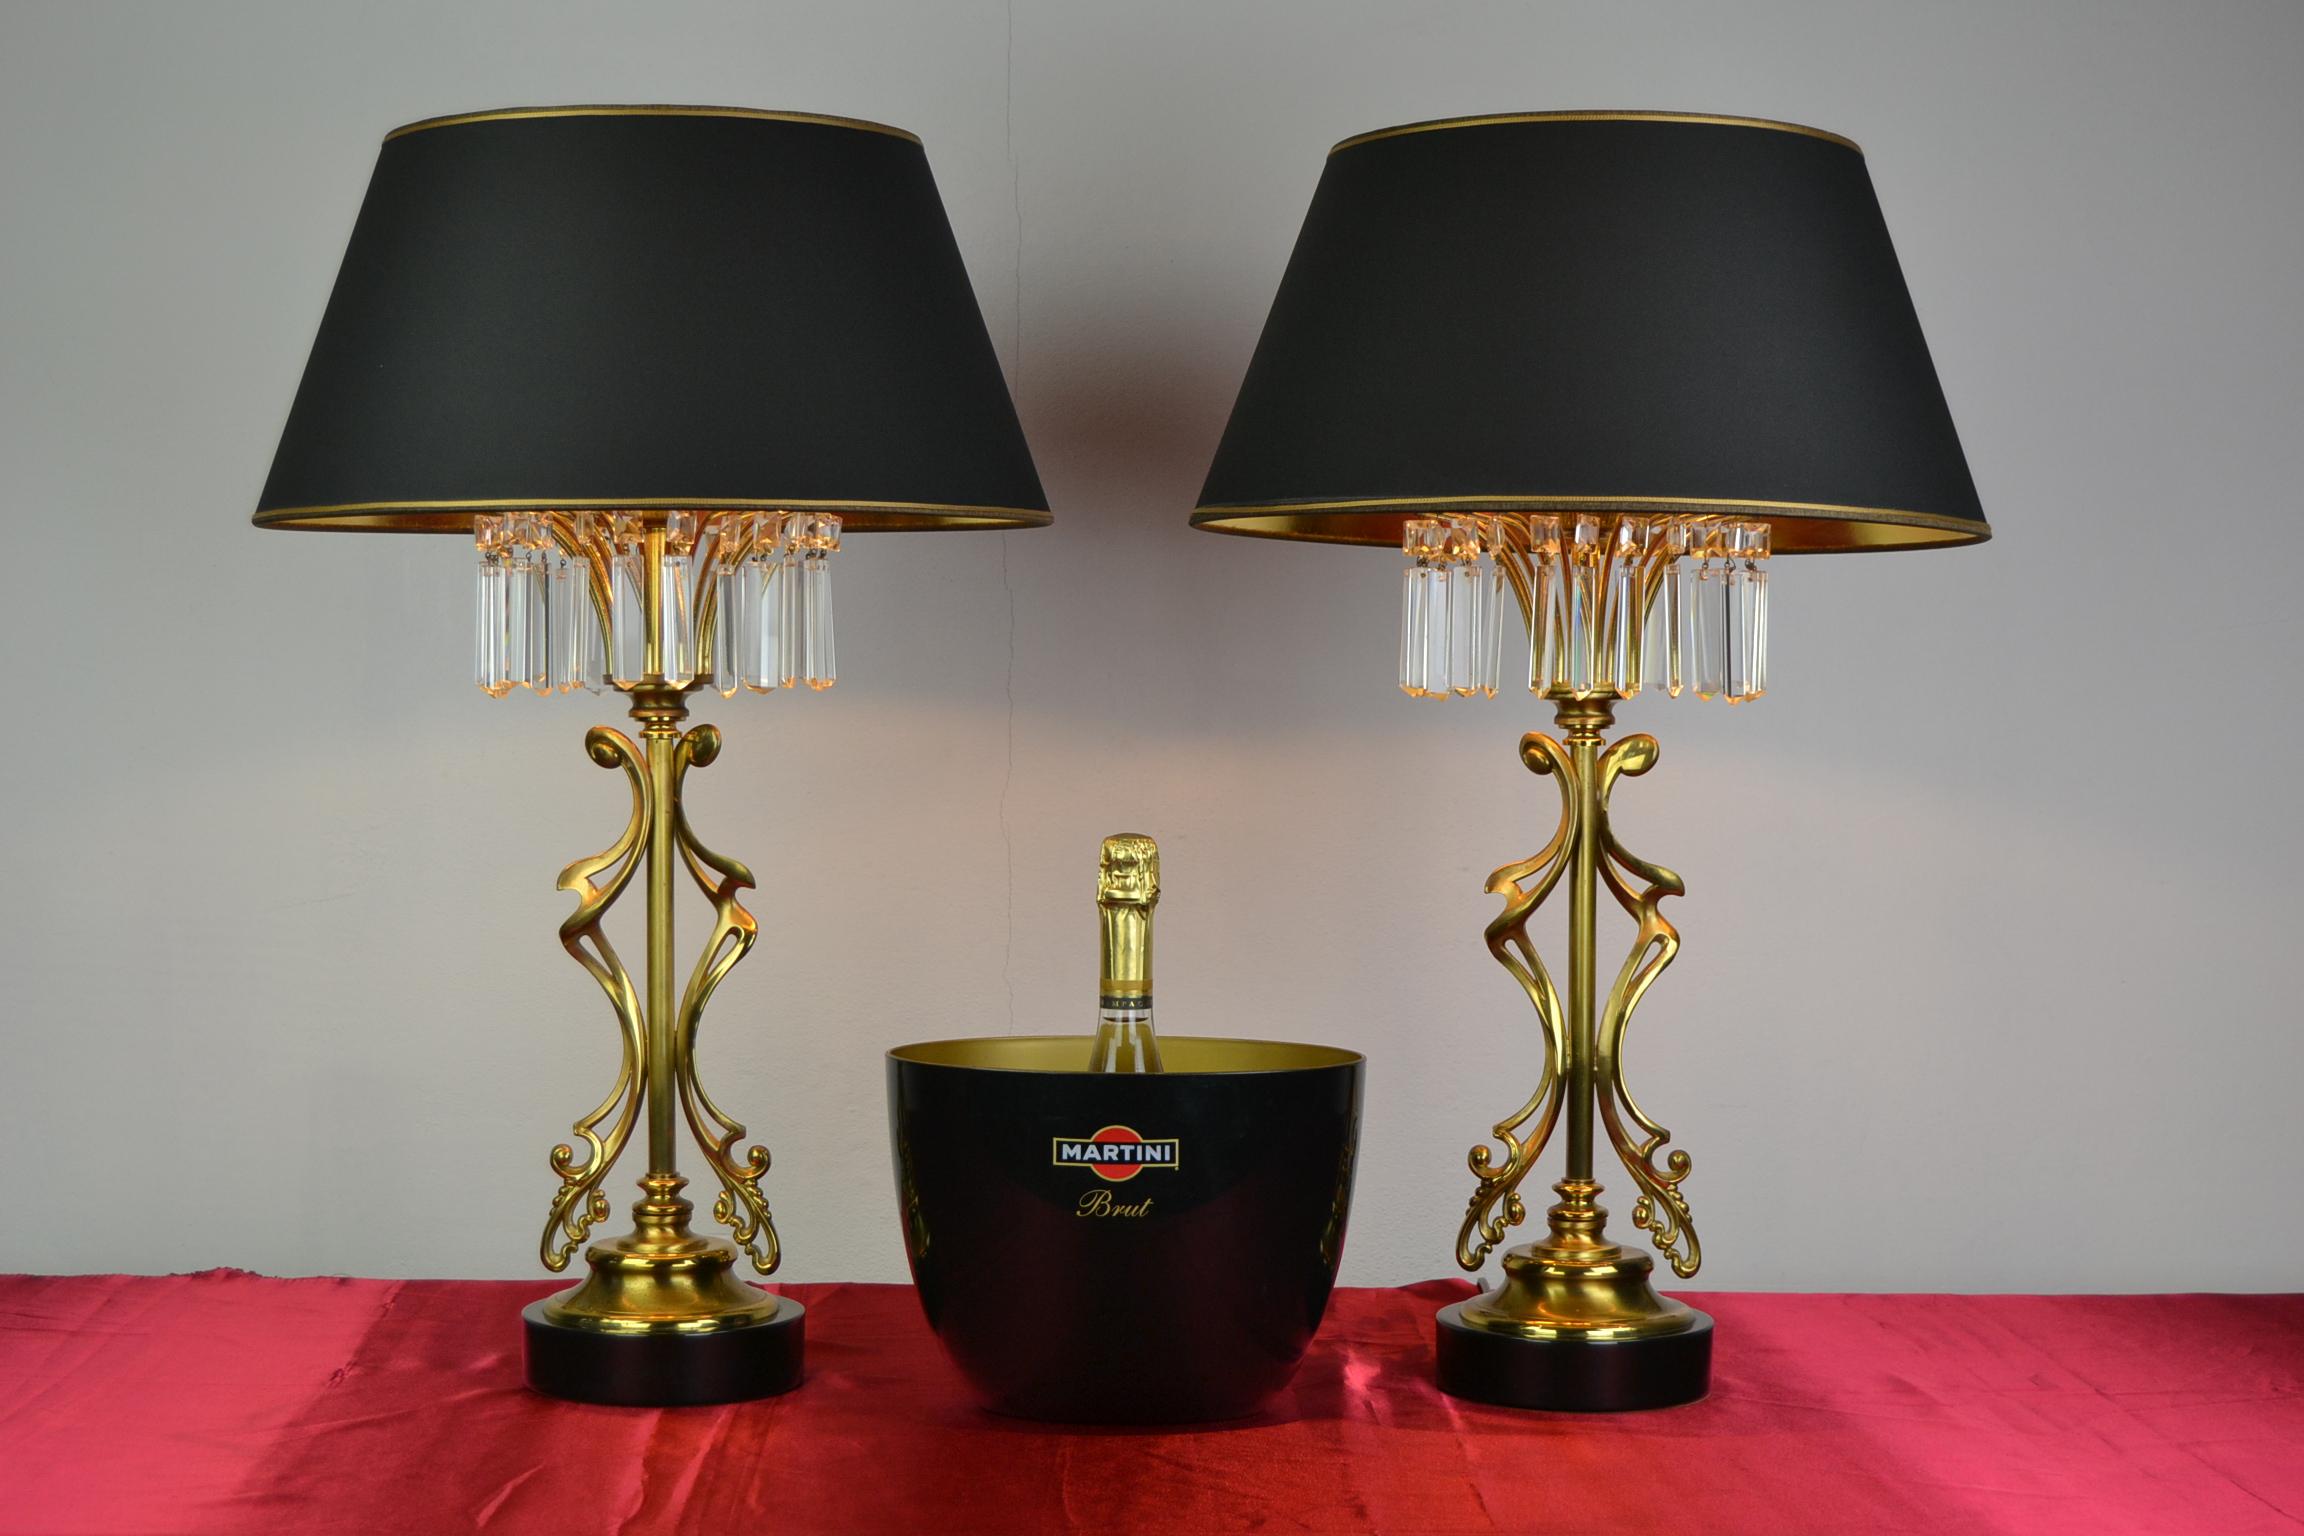 Awesome pair of Lustrerie Deknudt table lamps.
This stylish set of 1970s table lighting have an elegant and even abstract brass base, 
a black foot and on top sparkling crystal paces, which gives the awesome effect 
by the reflection in the